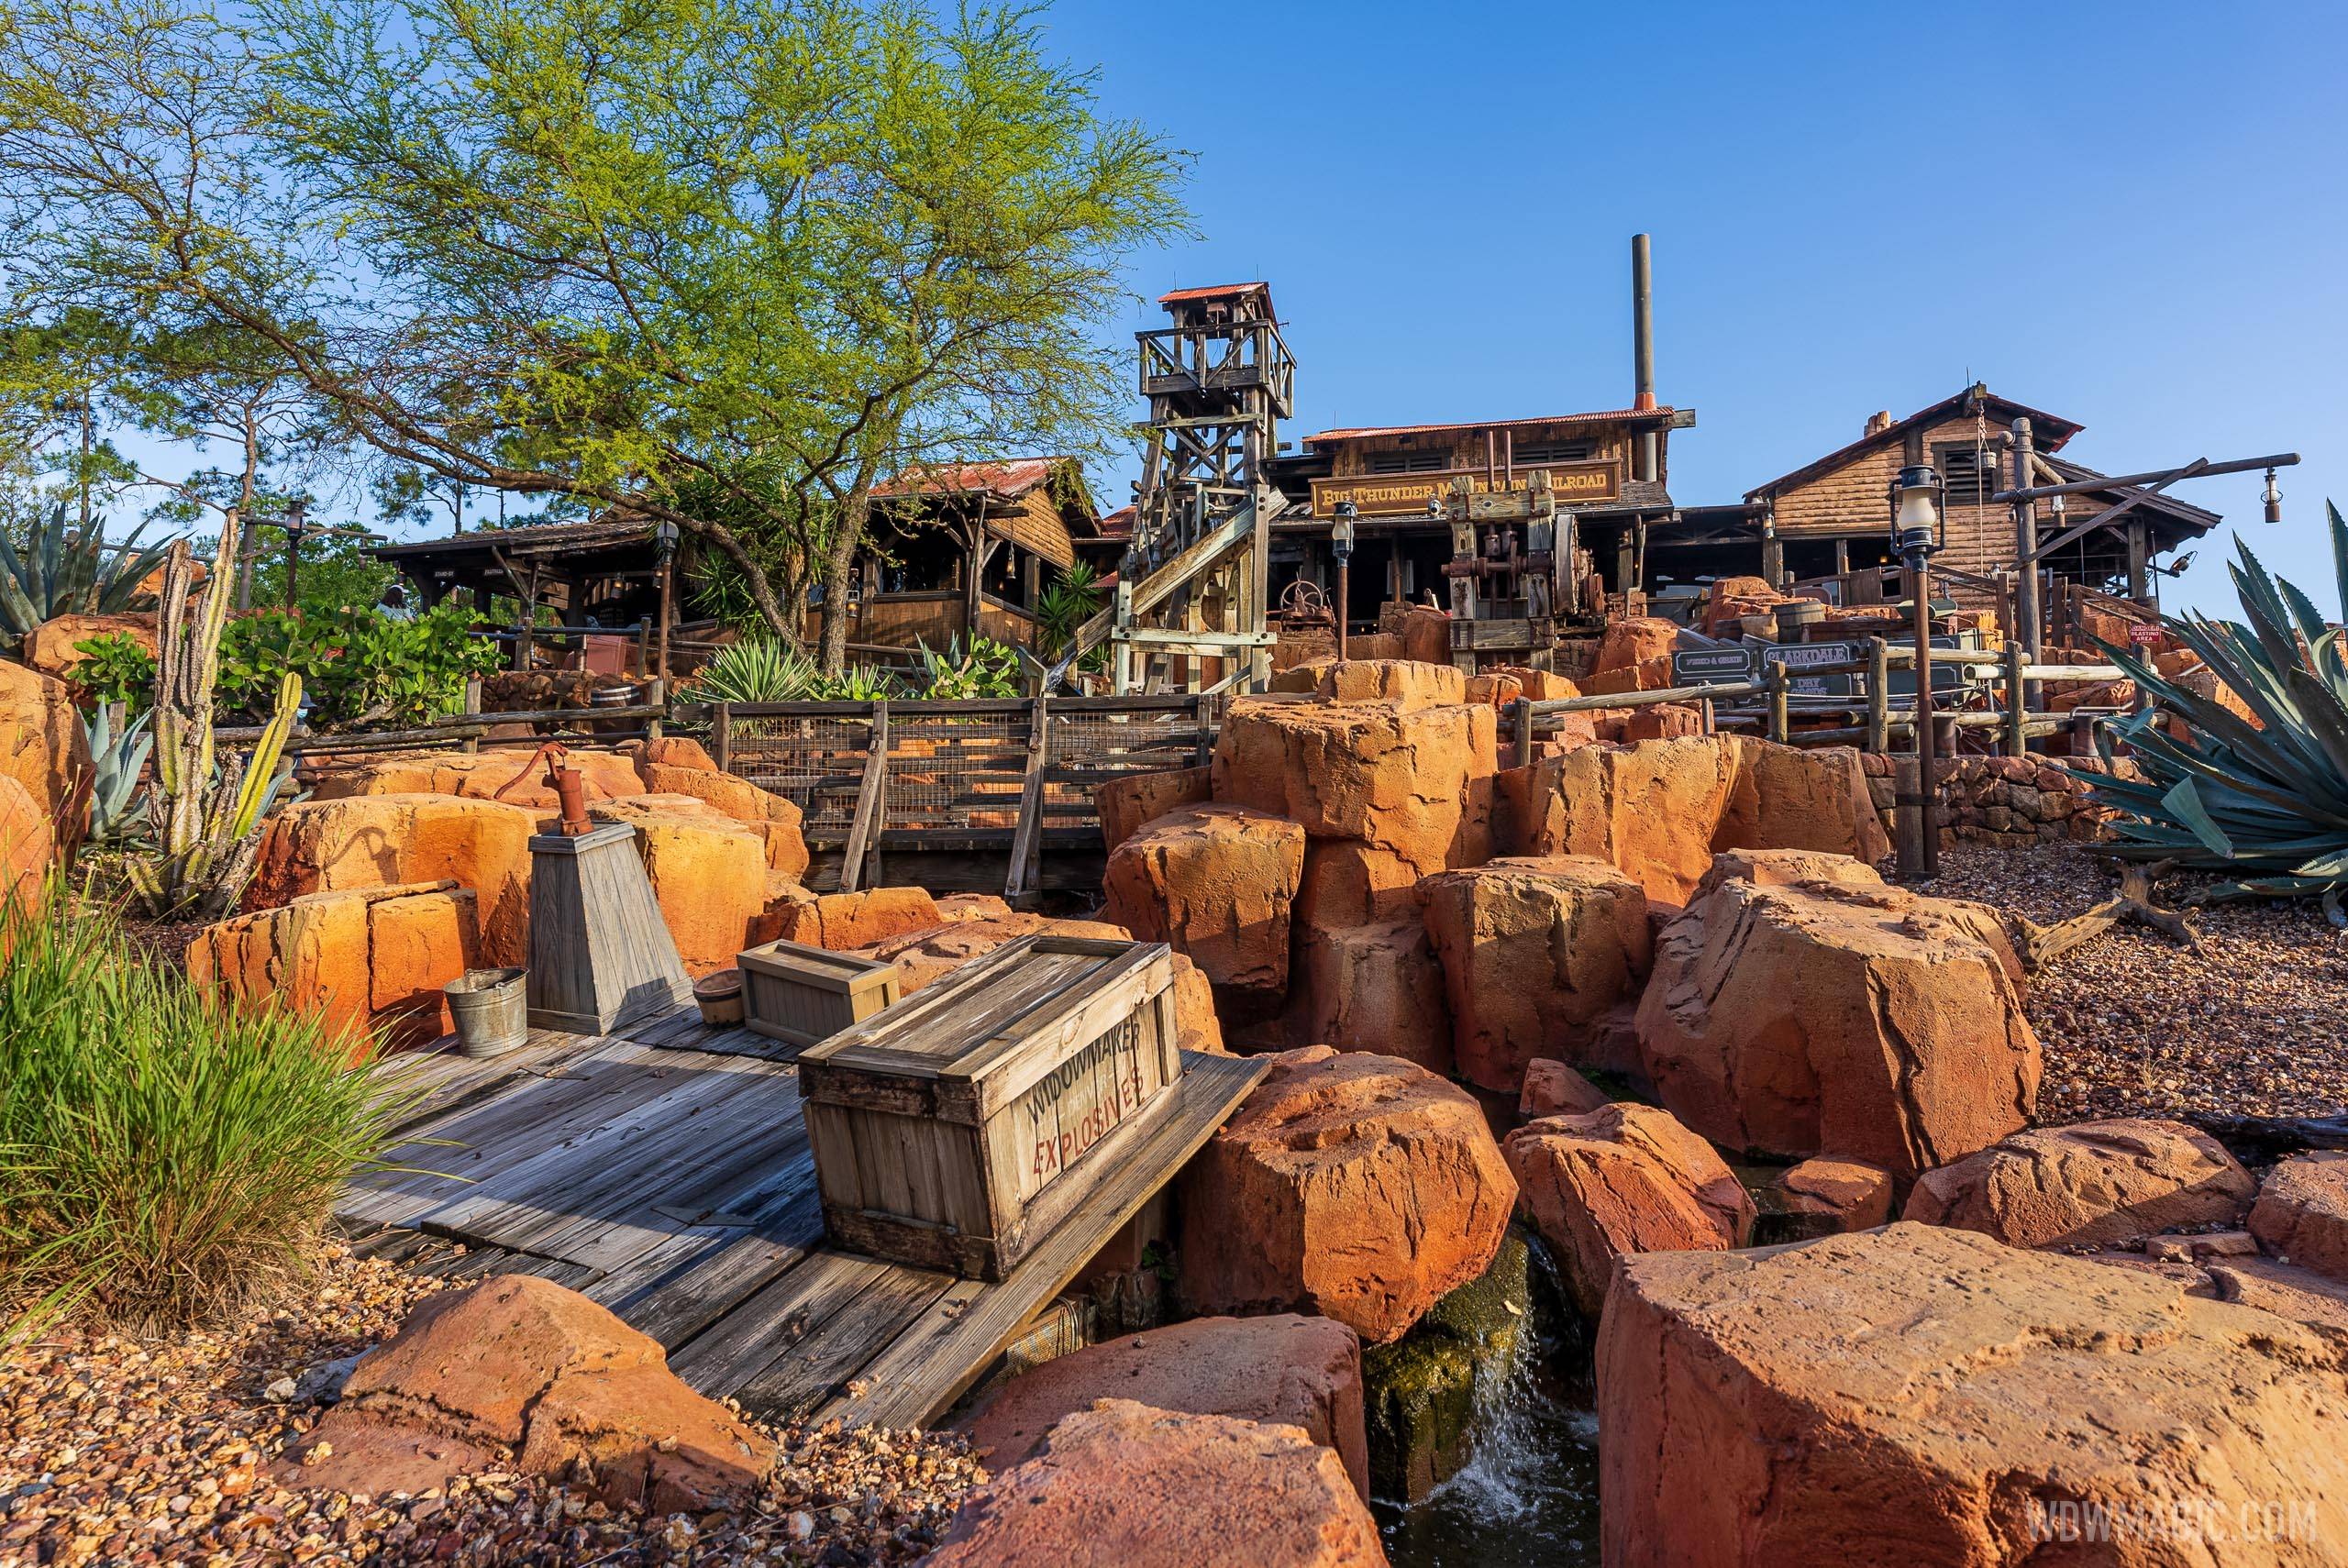 Big Thunder Mountain Railroad overview